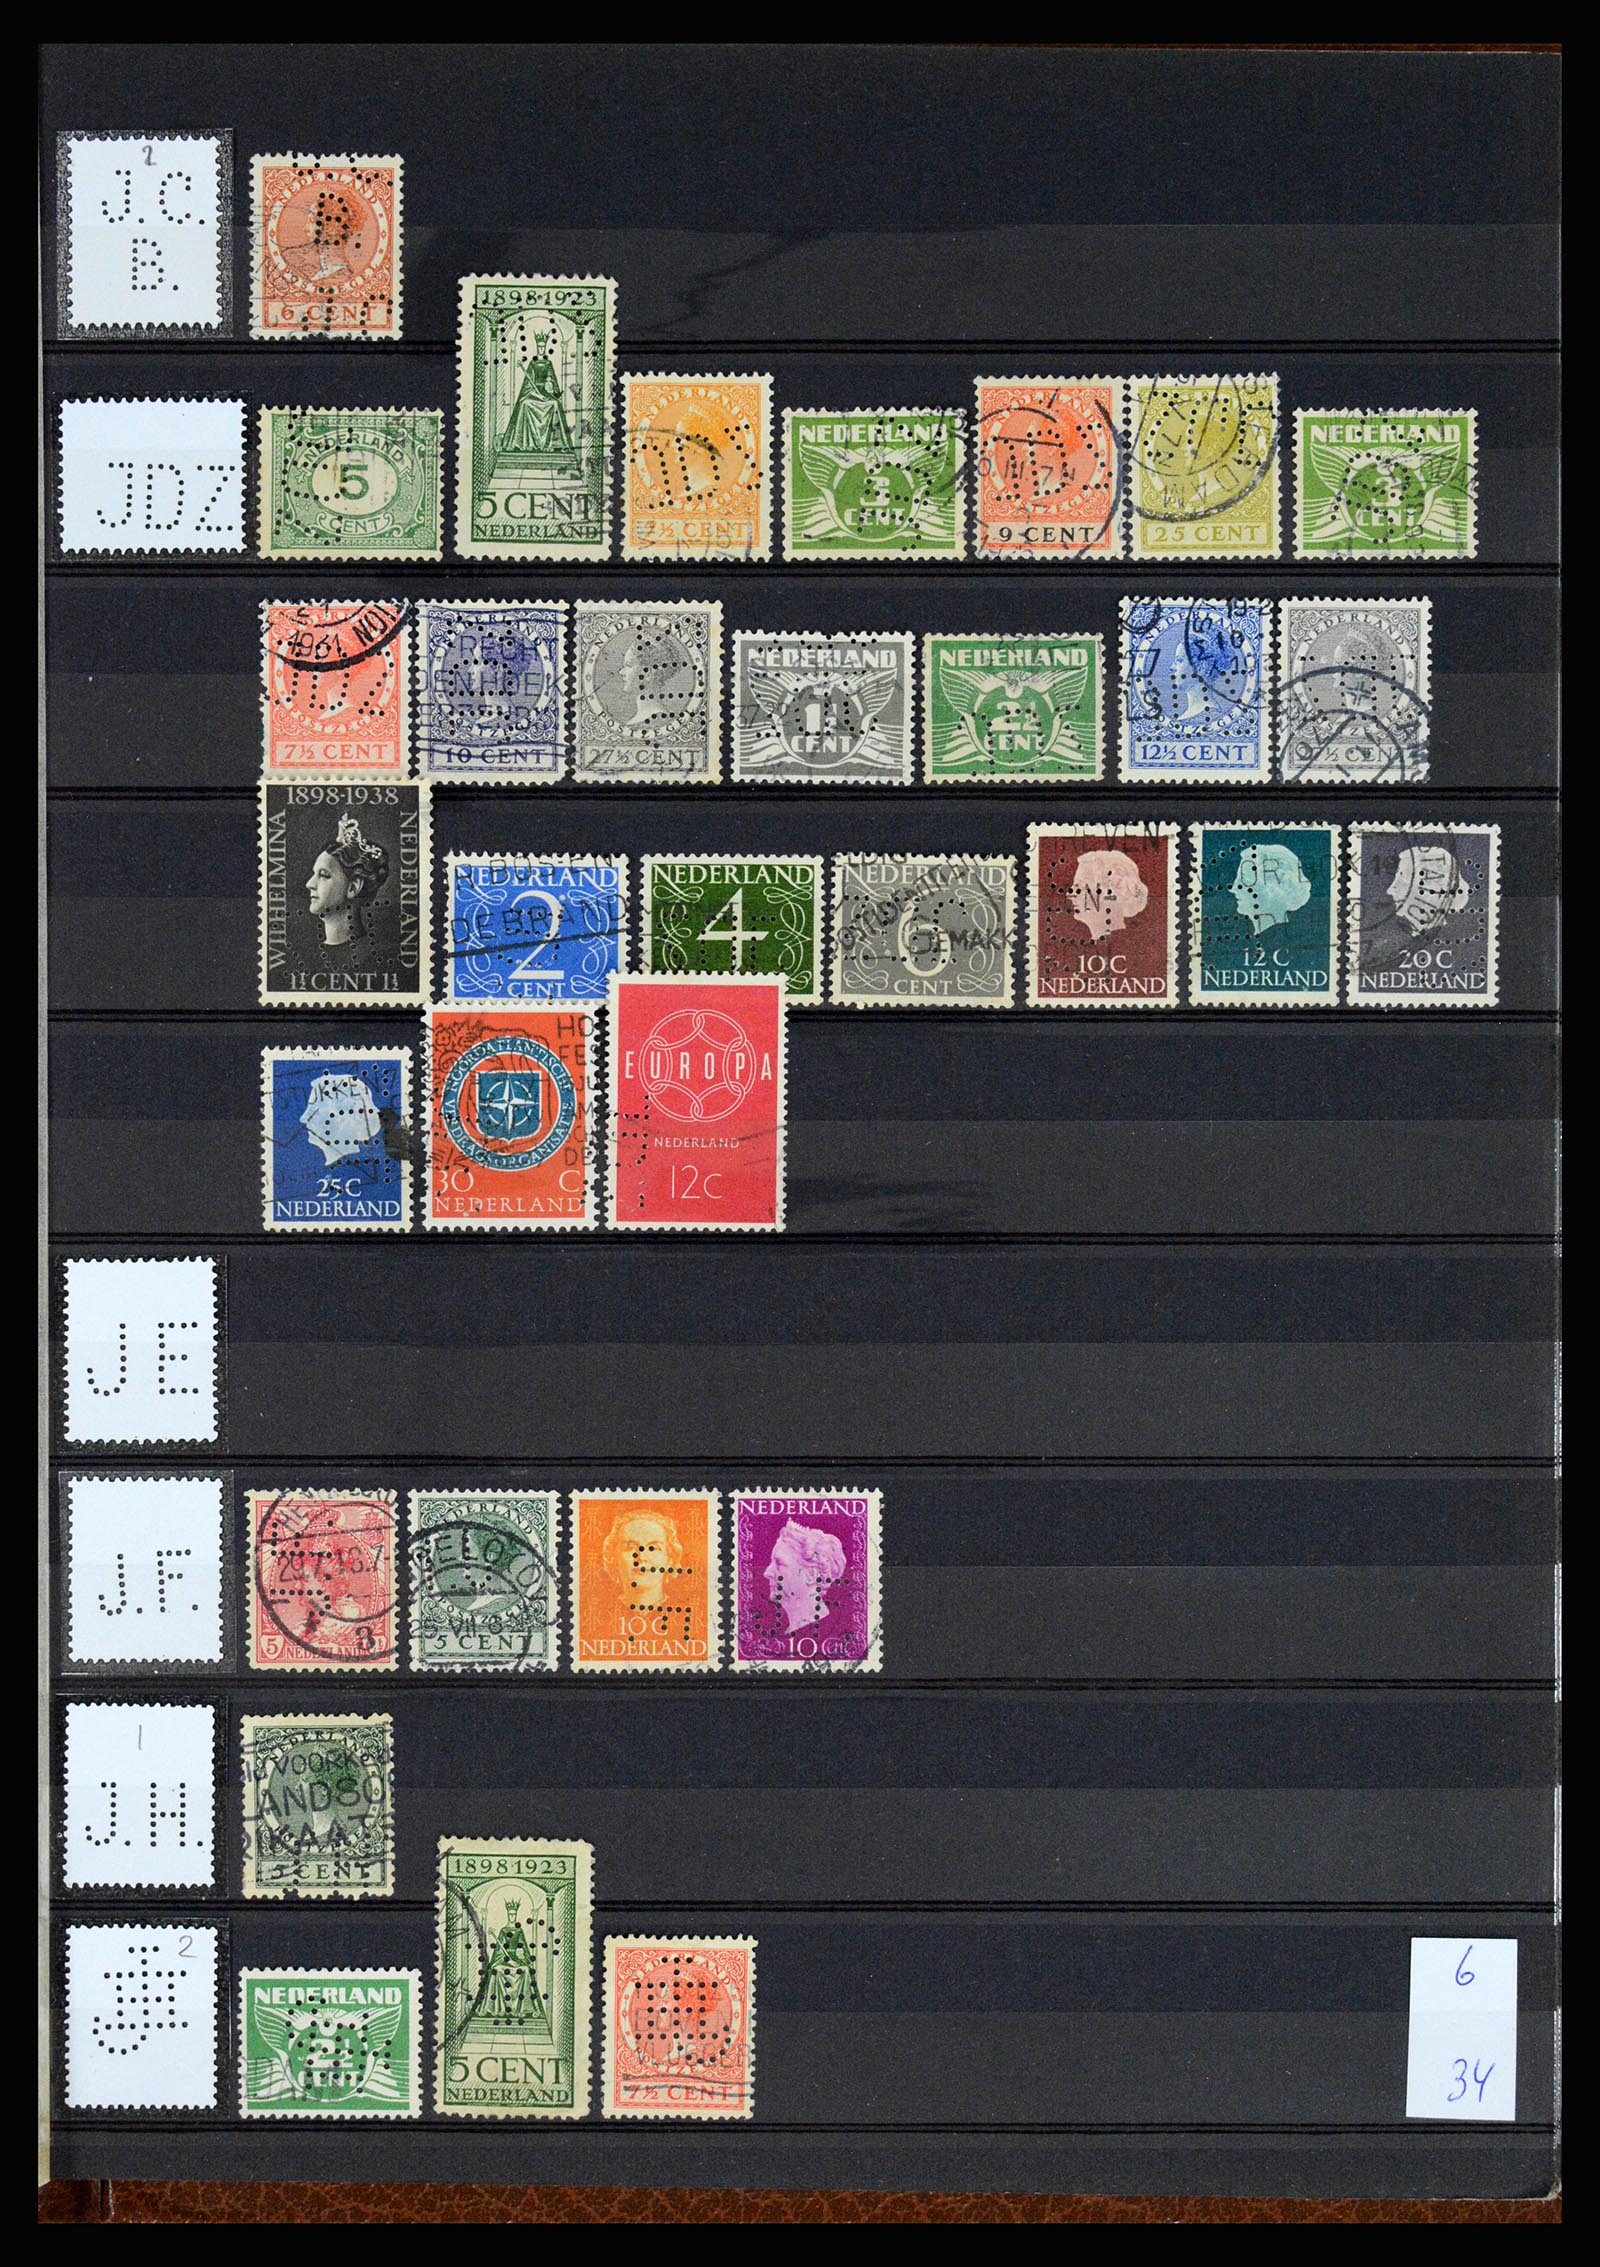 37183 022 - Stamp collection 37183 Netherlands perfins 1872-1960.